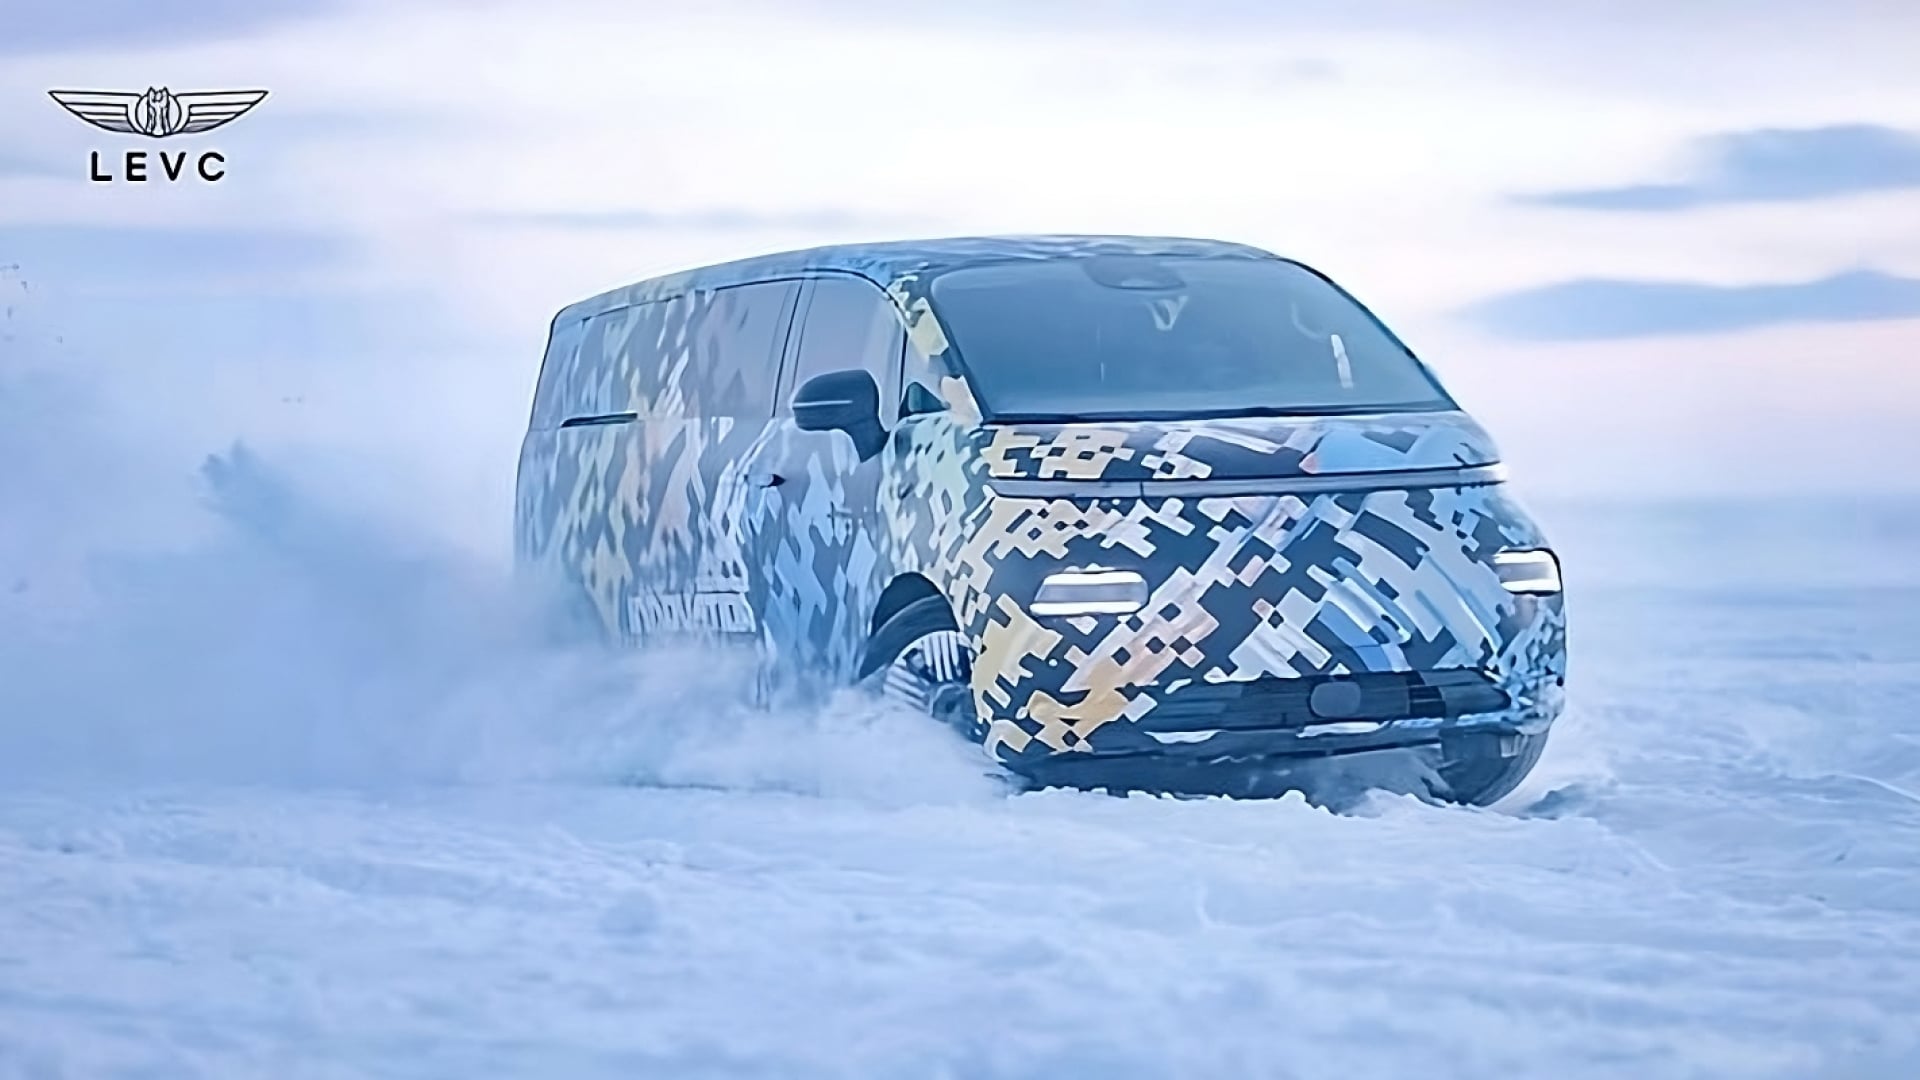 Geely’s LEVC L380 electric MPV undergoes winter tests in China